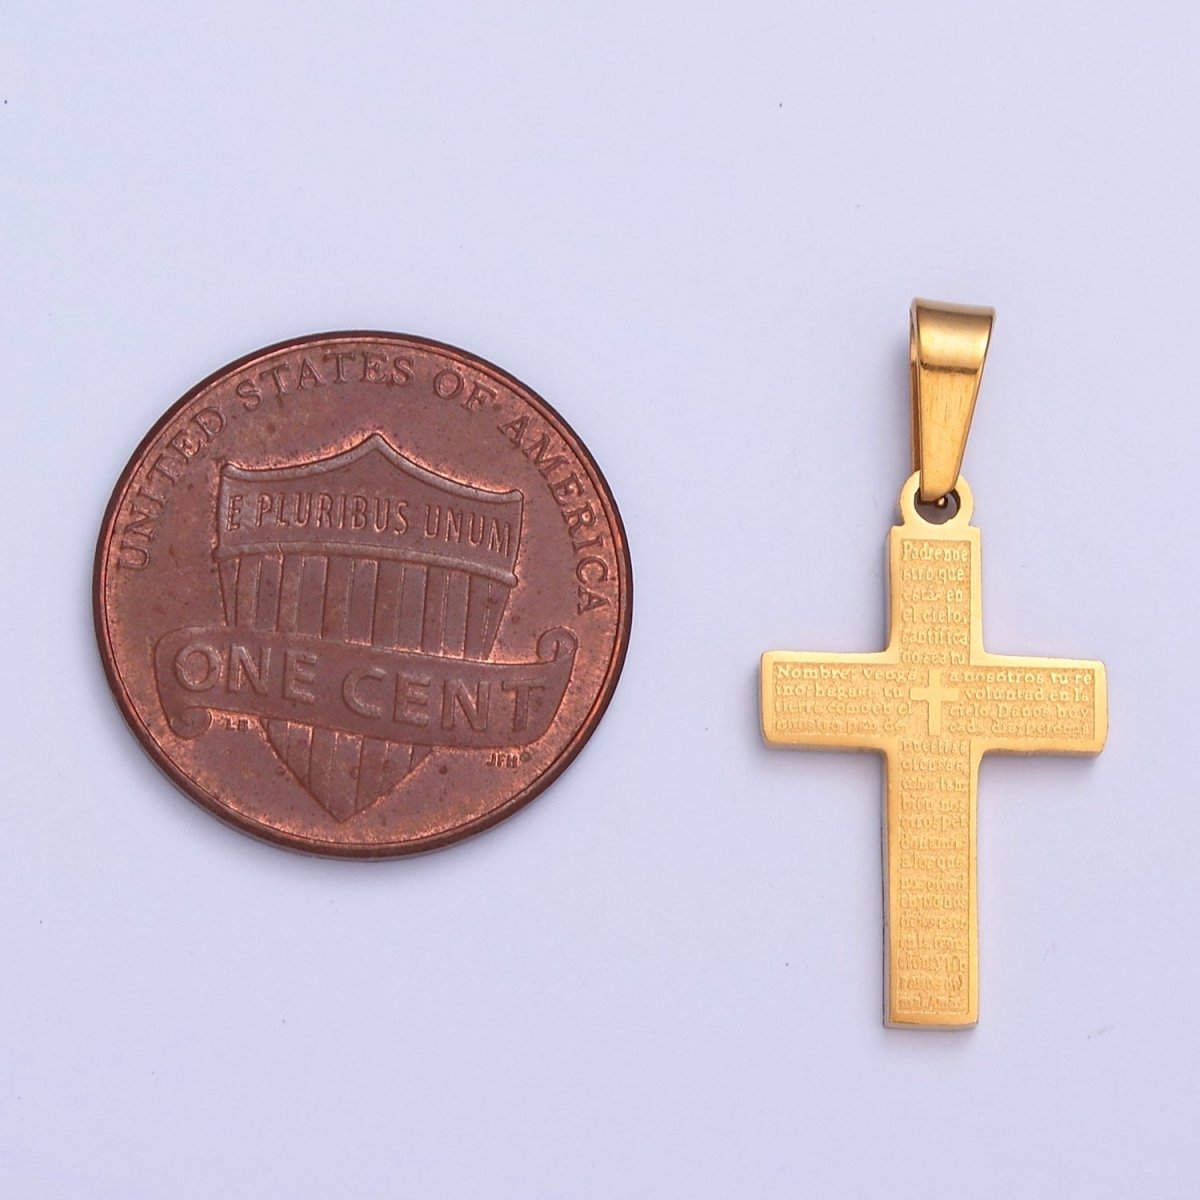 26X12.3mm Minimalist Gold & Silver Religious Cross, Stainless Steel Cross with Lords Player (in Spanish) I-830 - DLUXCA